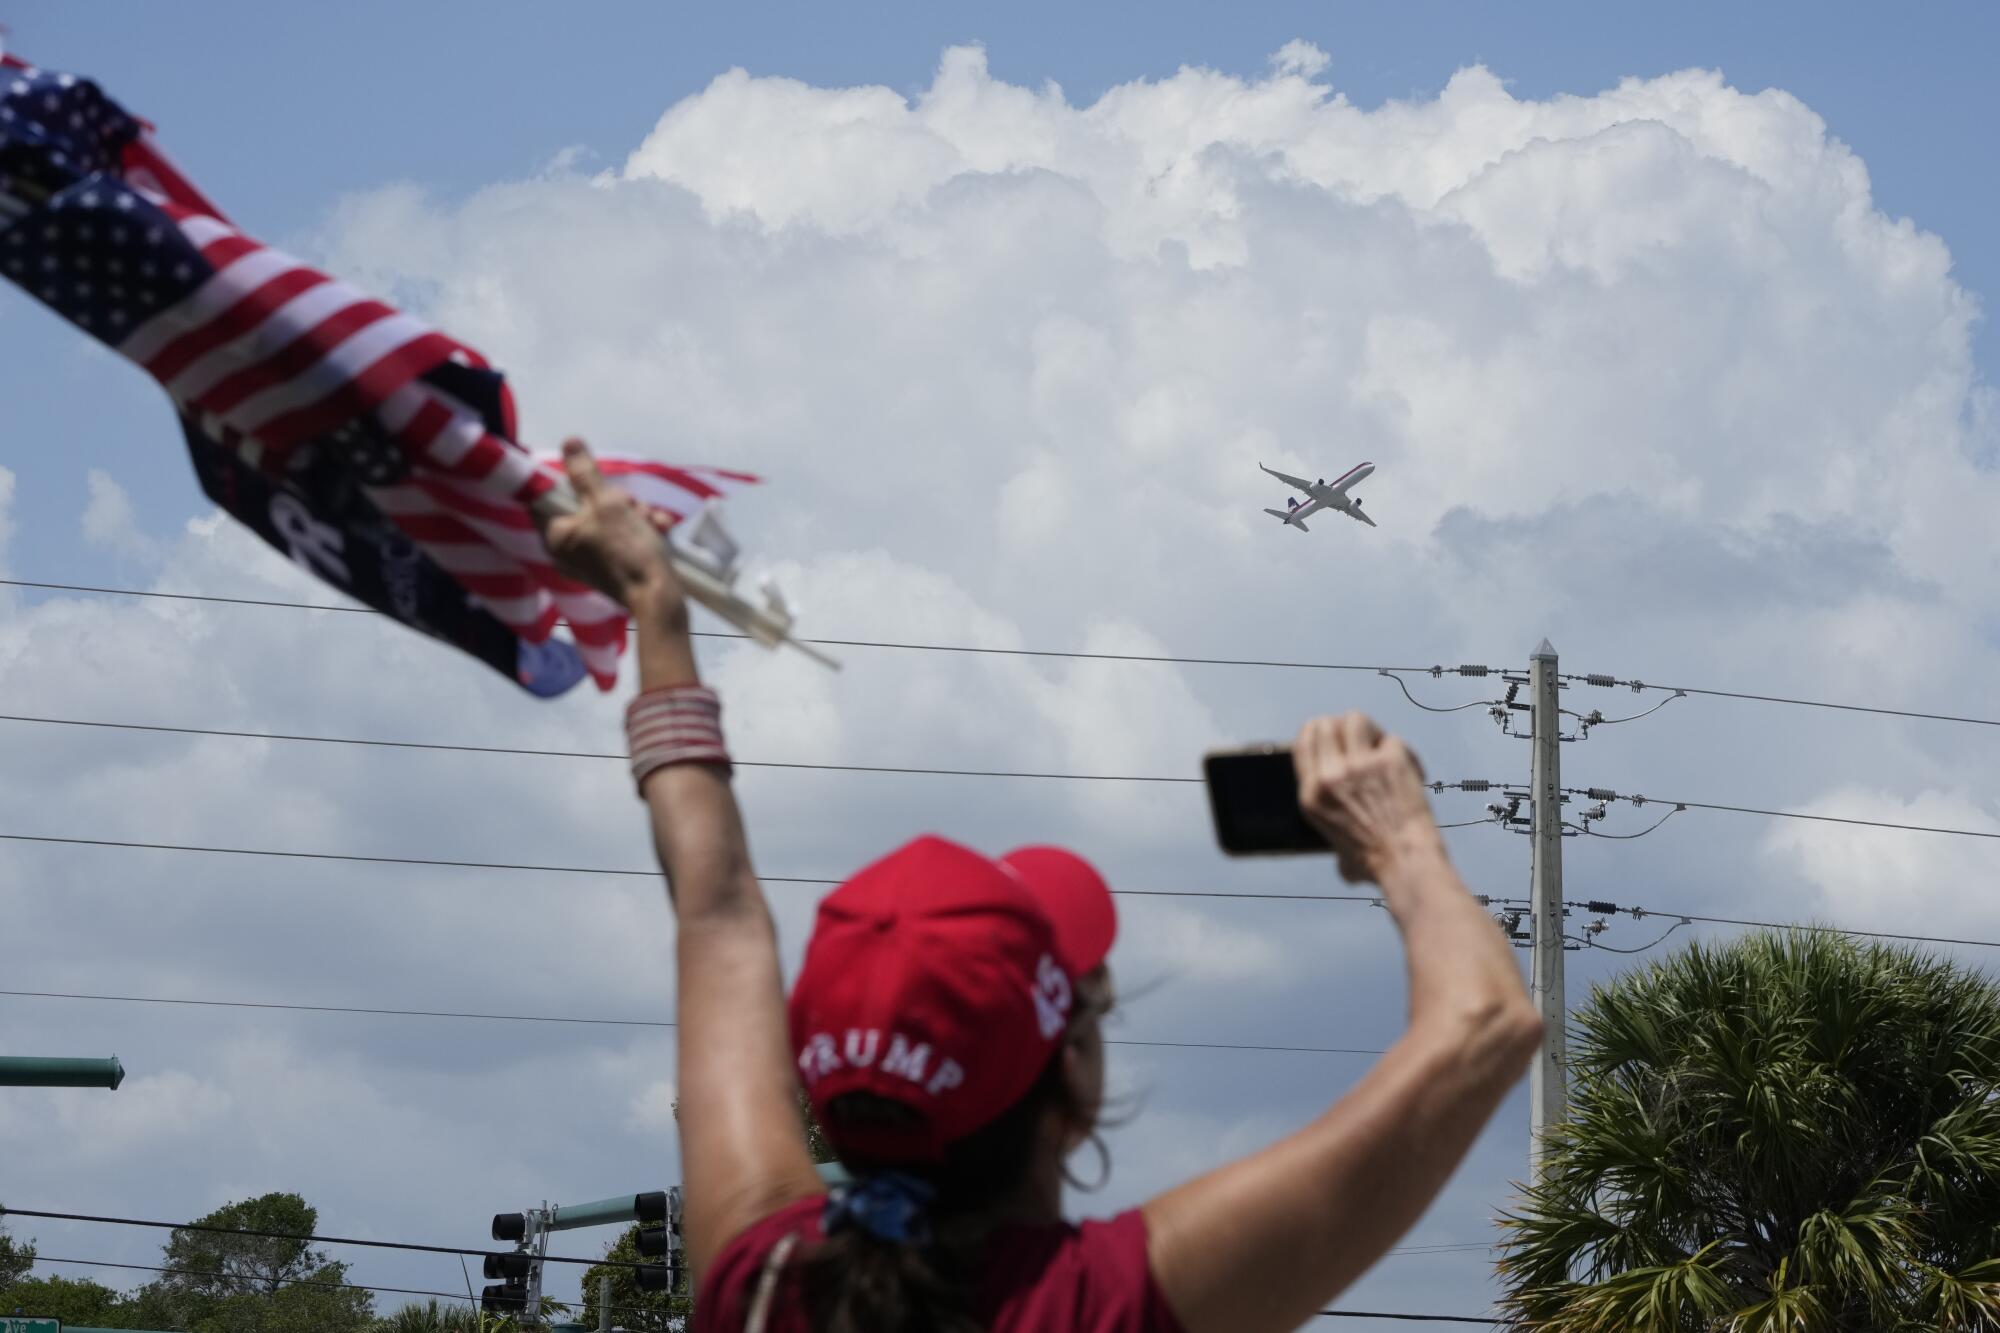 A woman, holding small American flags in her left had and a phone in her right hand, waves toward a plane in sky